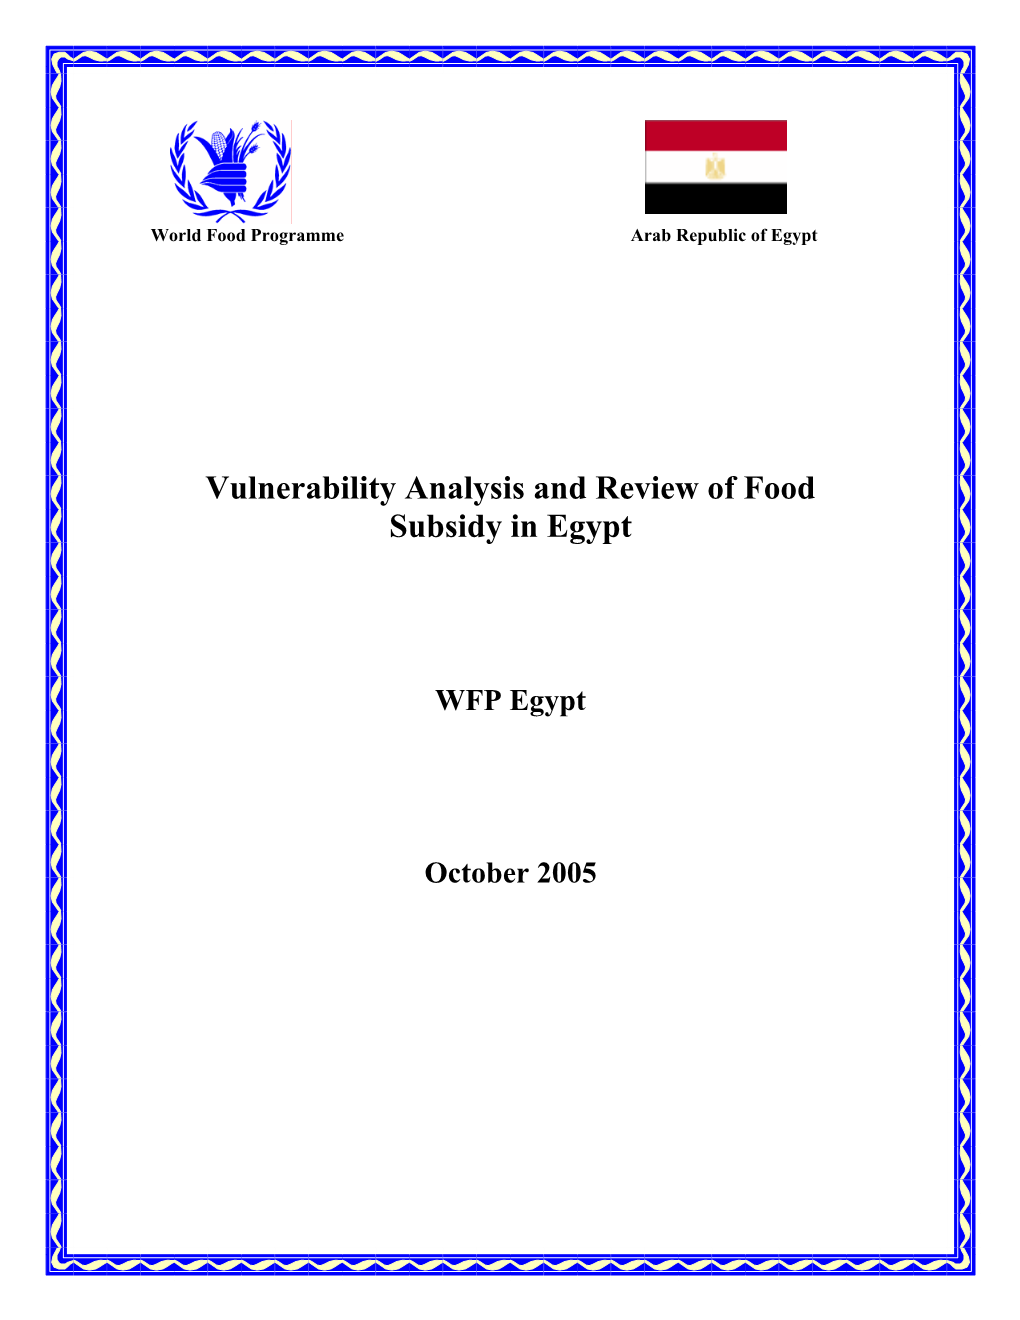 Vulnerability Analysis and Review of Food Subsidy in Egypt